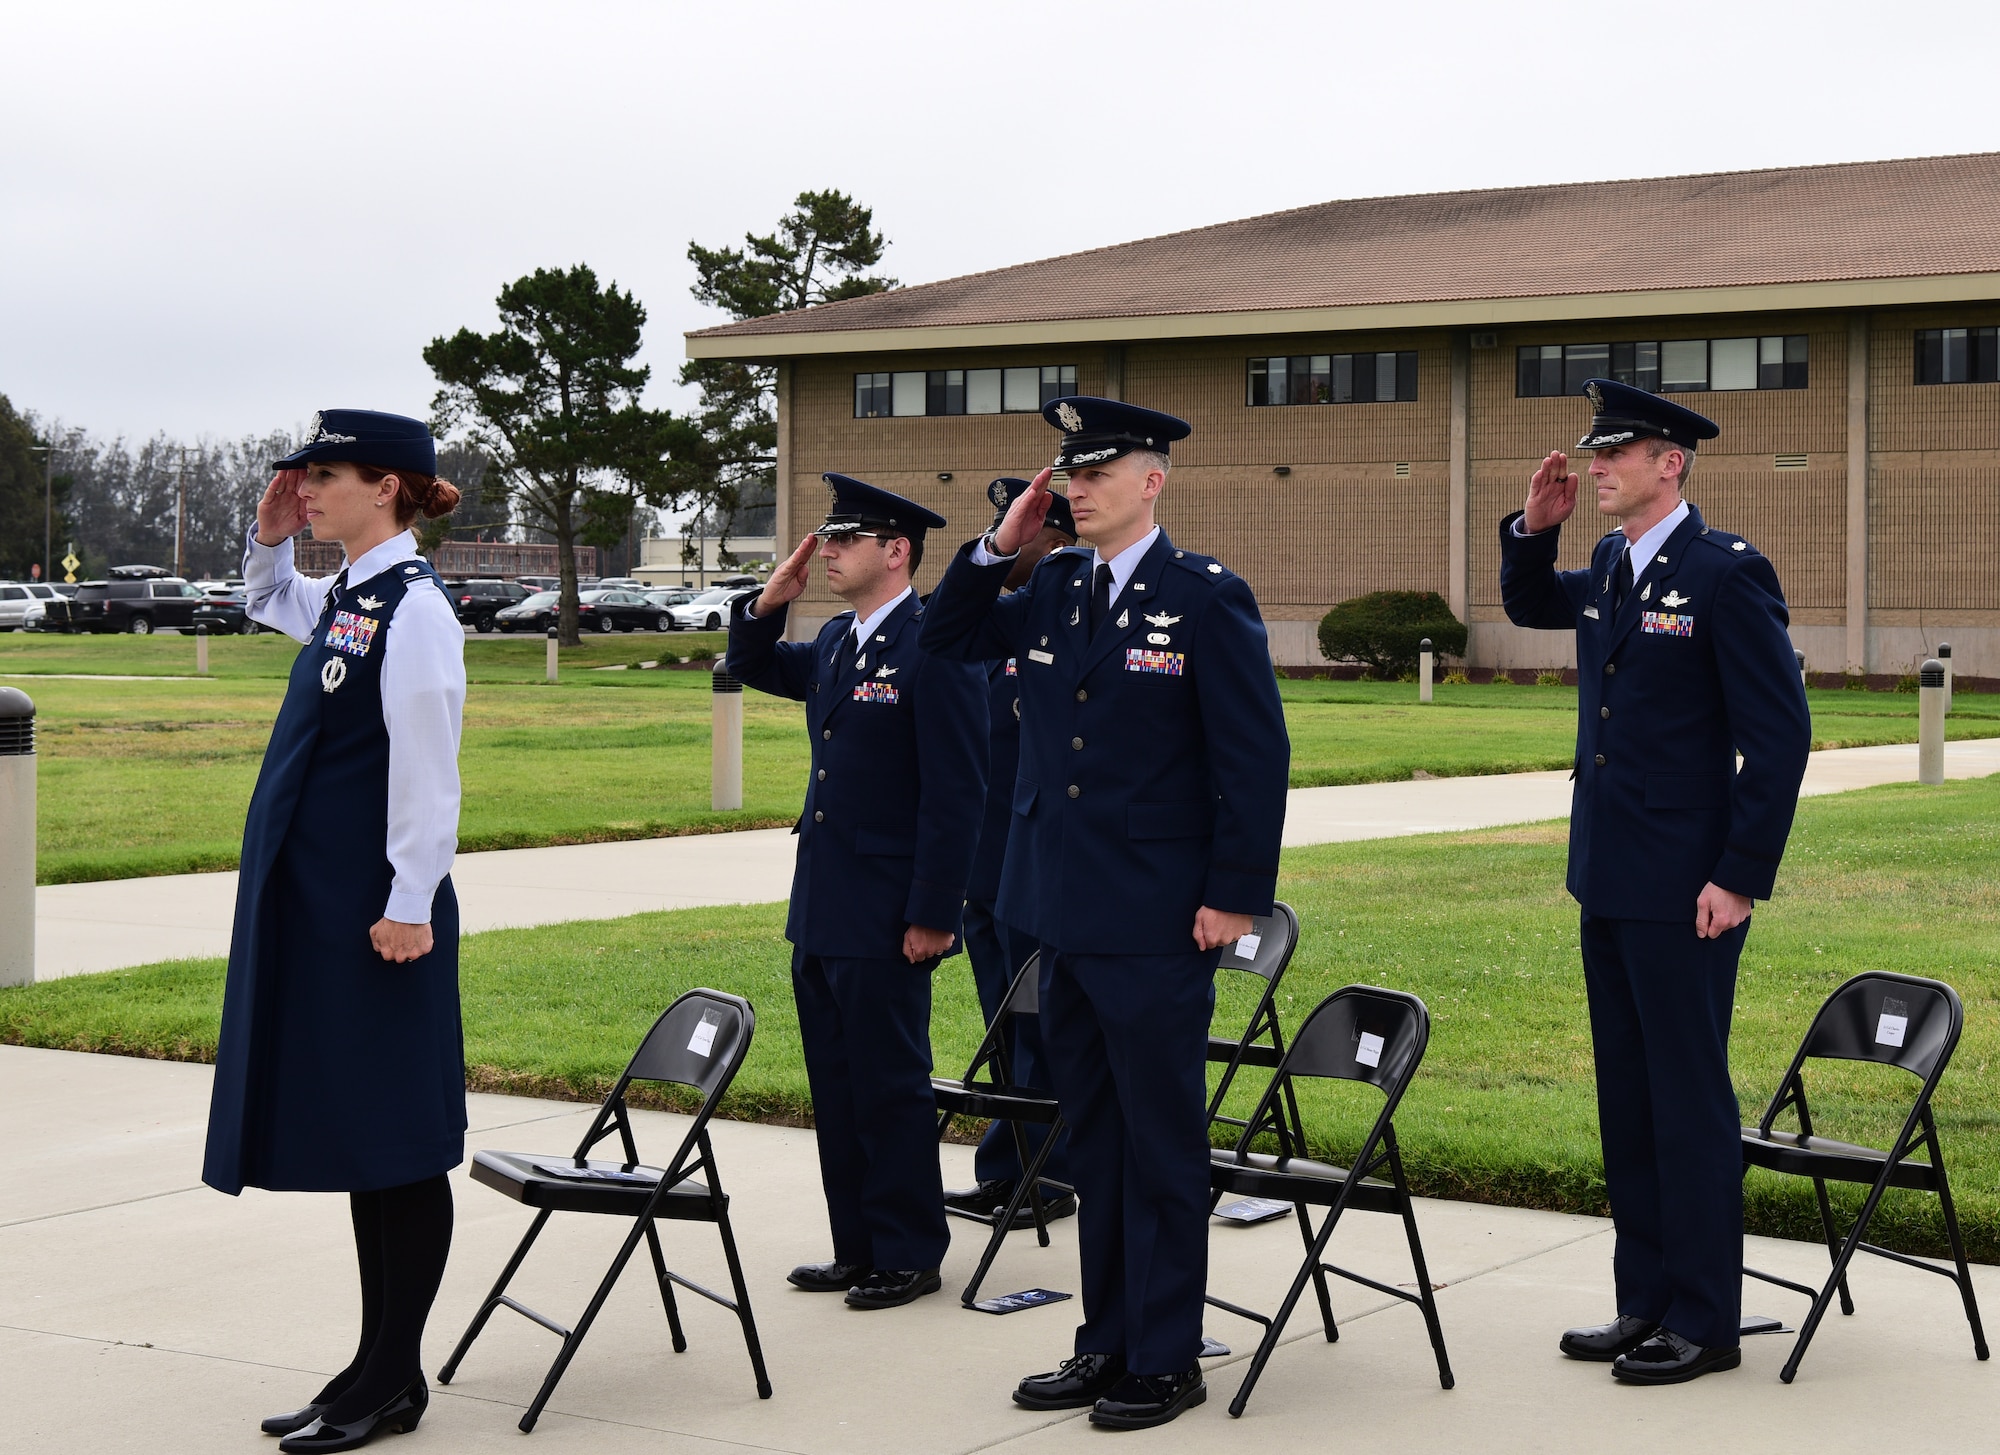 The distinguished guests formed in a delta and saluted at the assumption of command ceremony at Vandenberg Space Force Base, September 2, 2021.